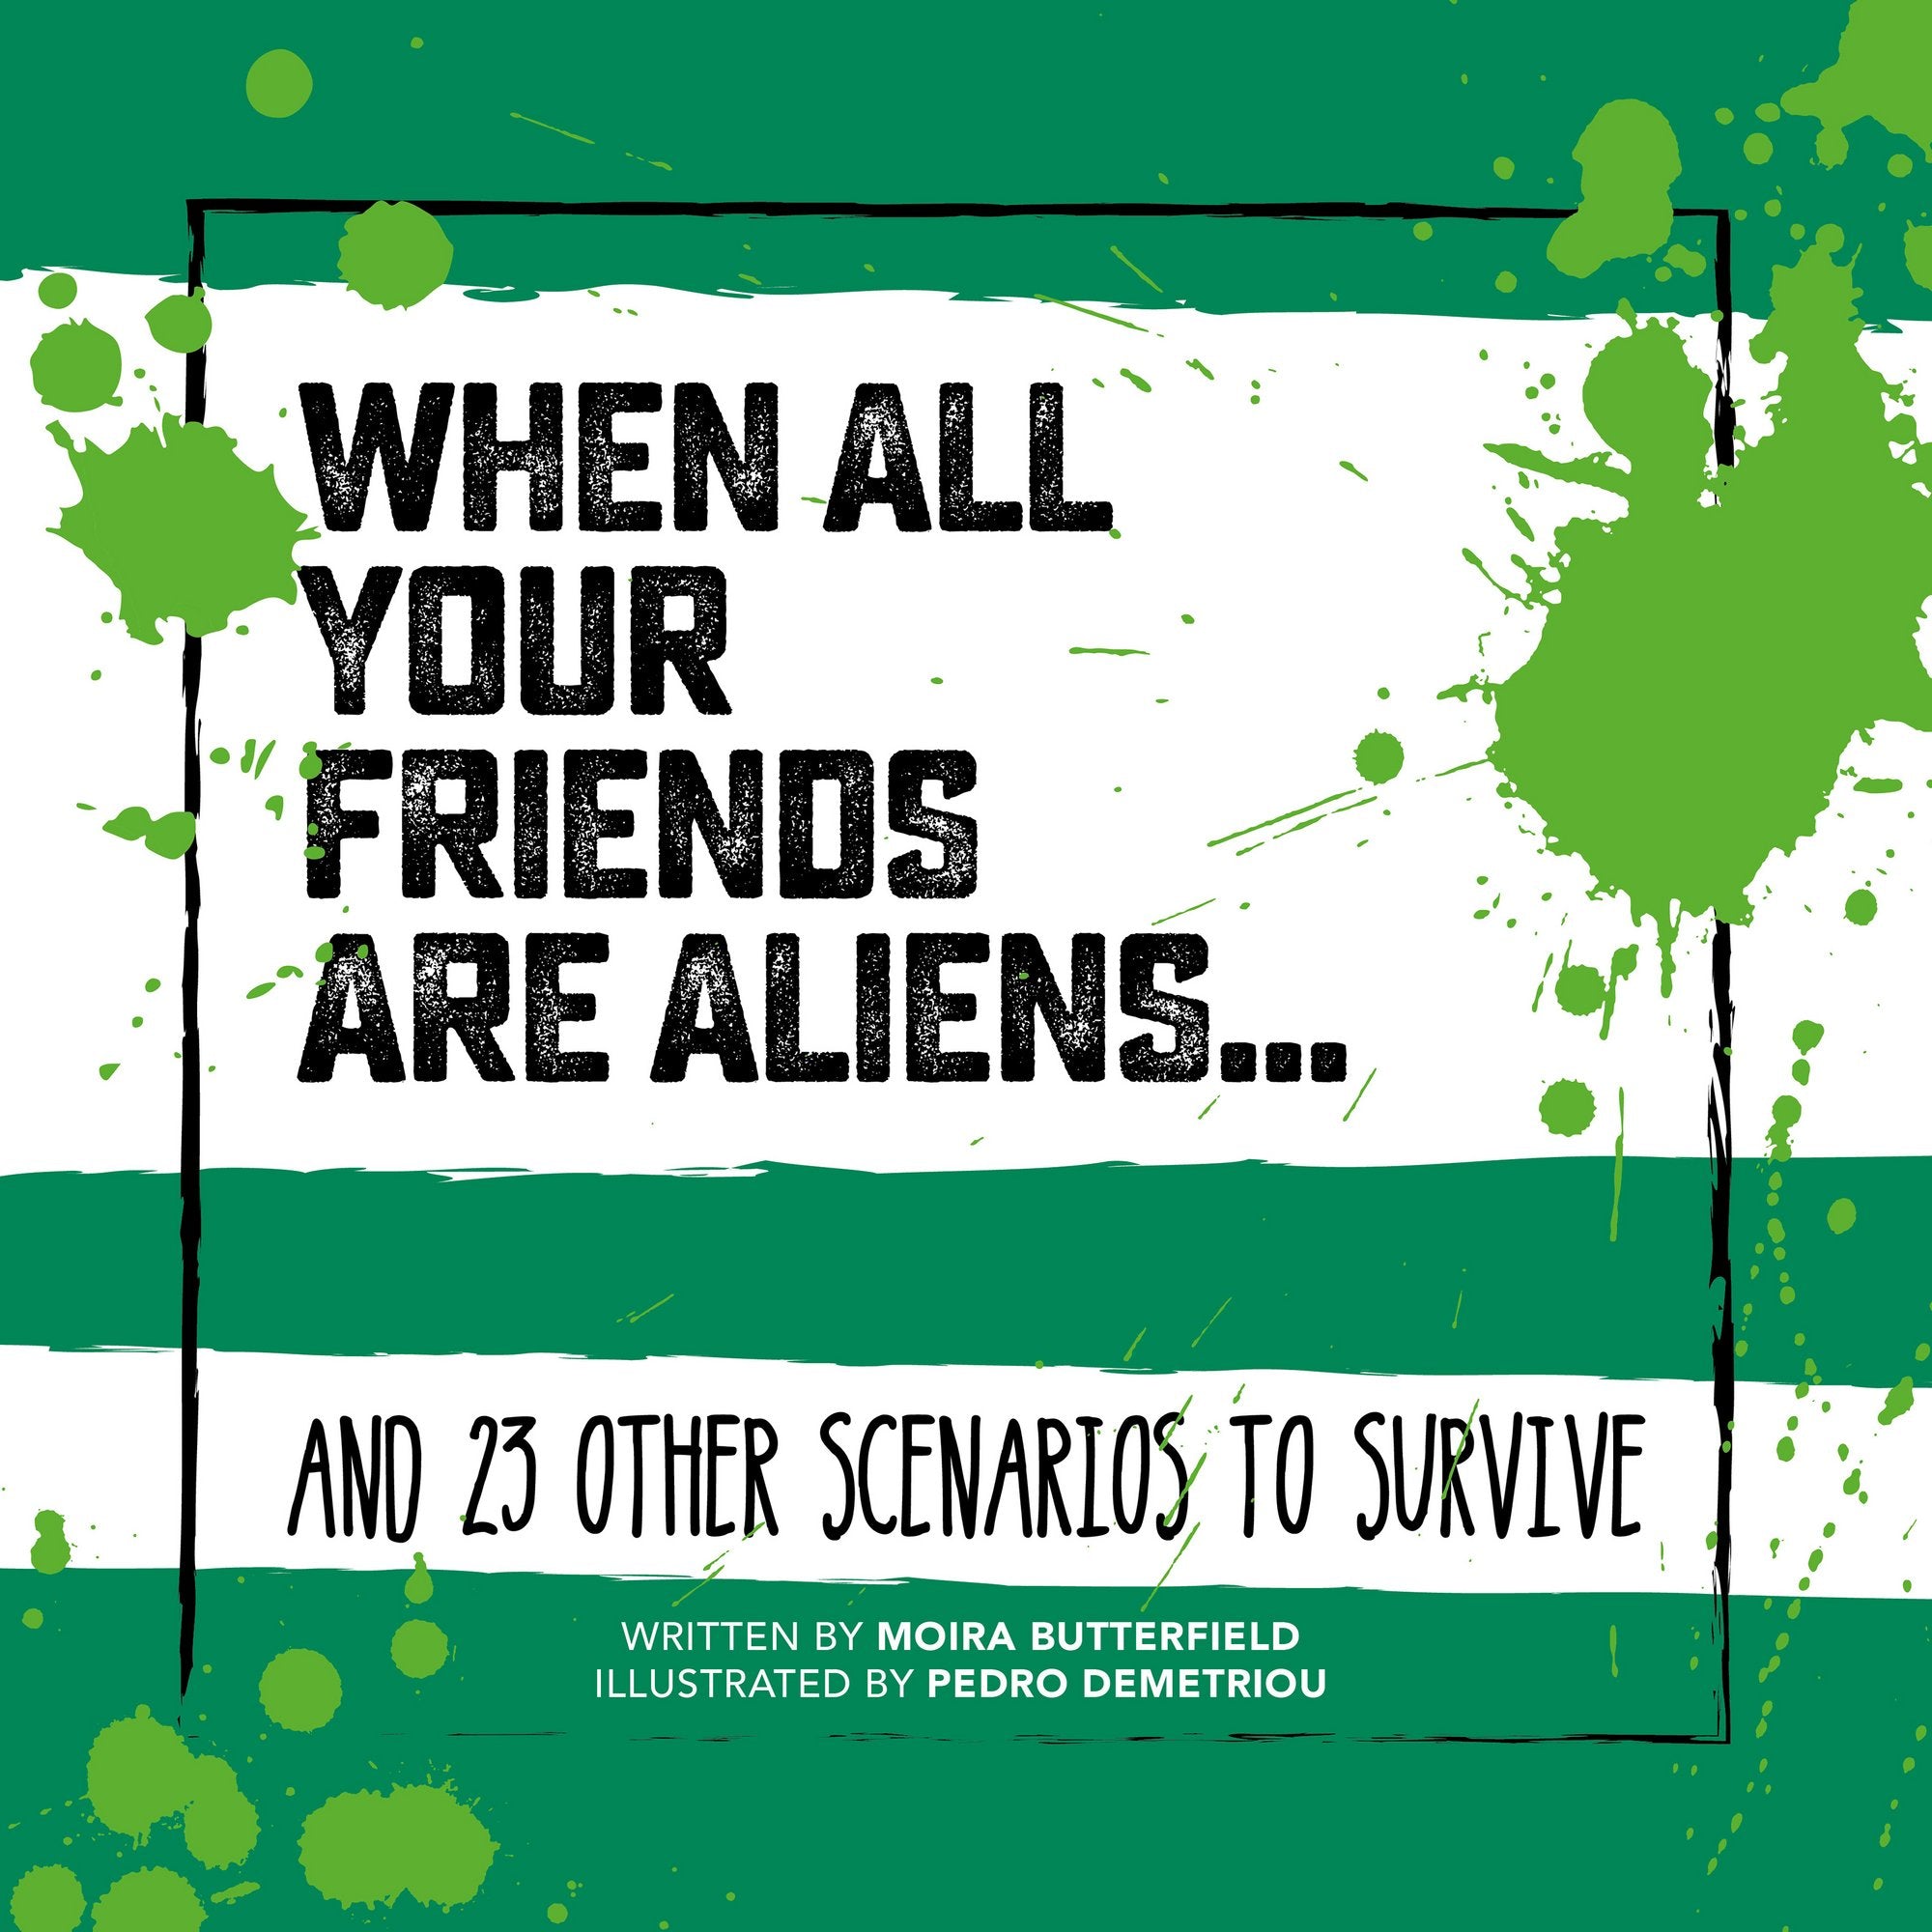 When All Your Friends Are Aliens: And 23 Other Scenarios to Survive